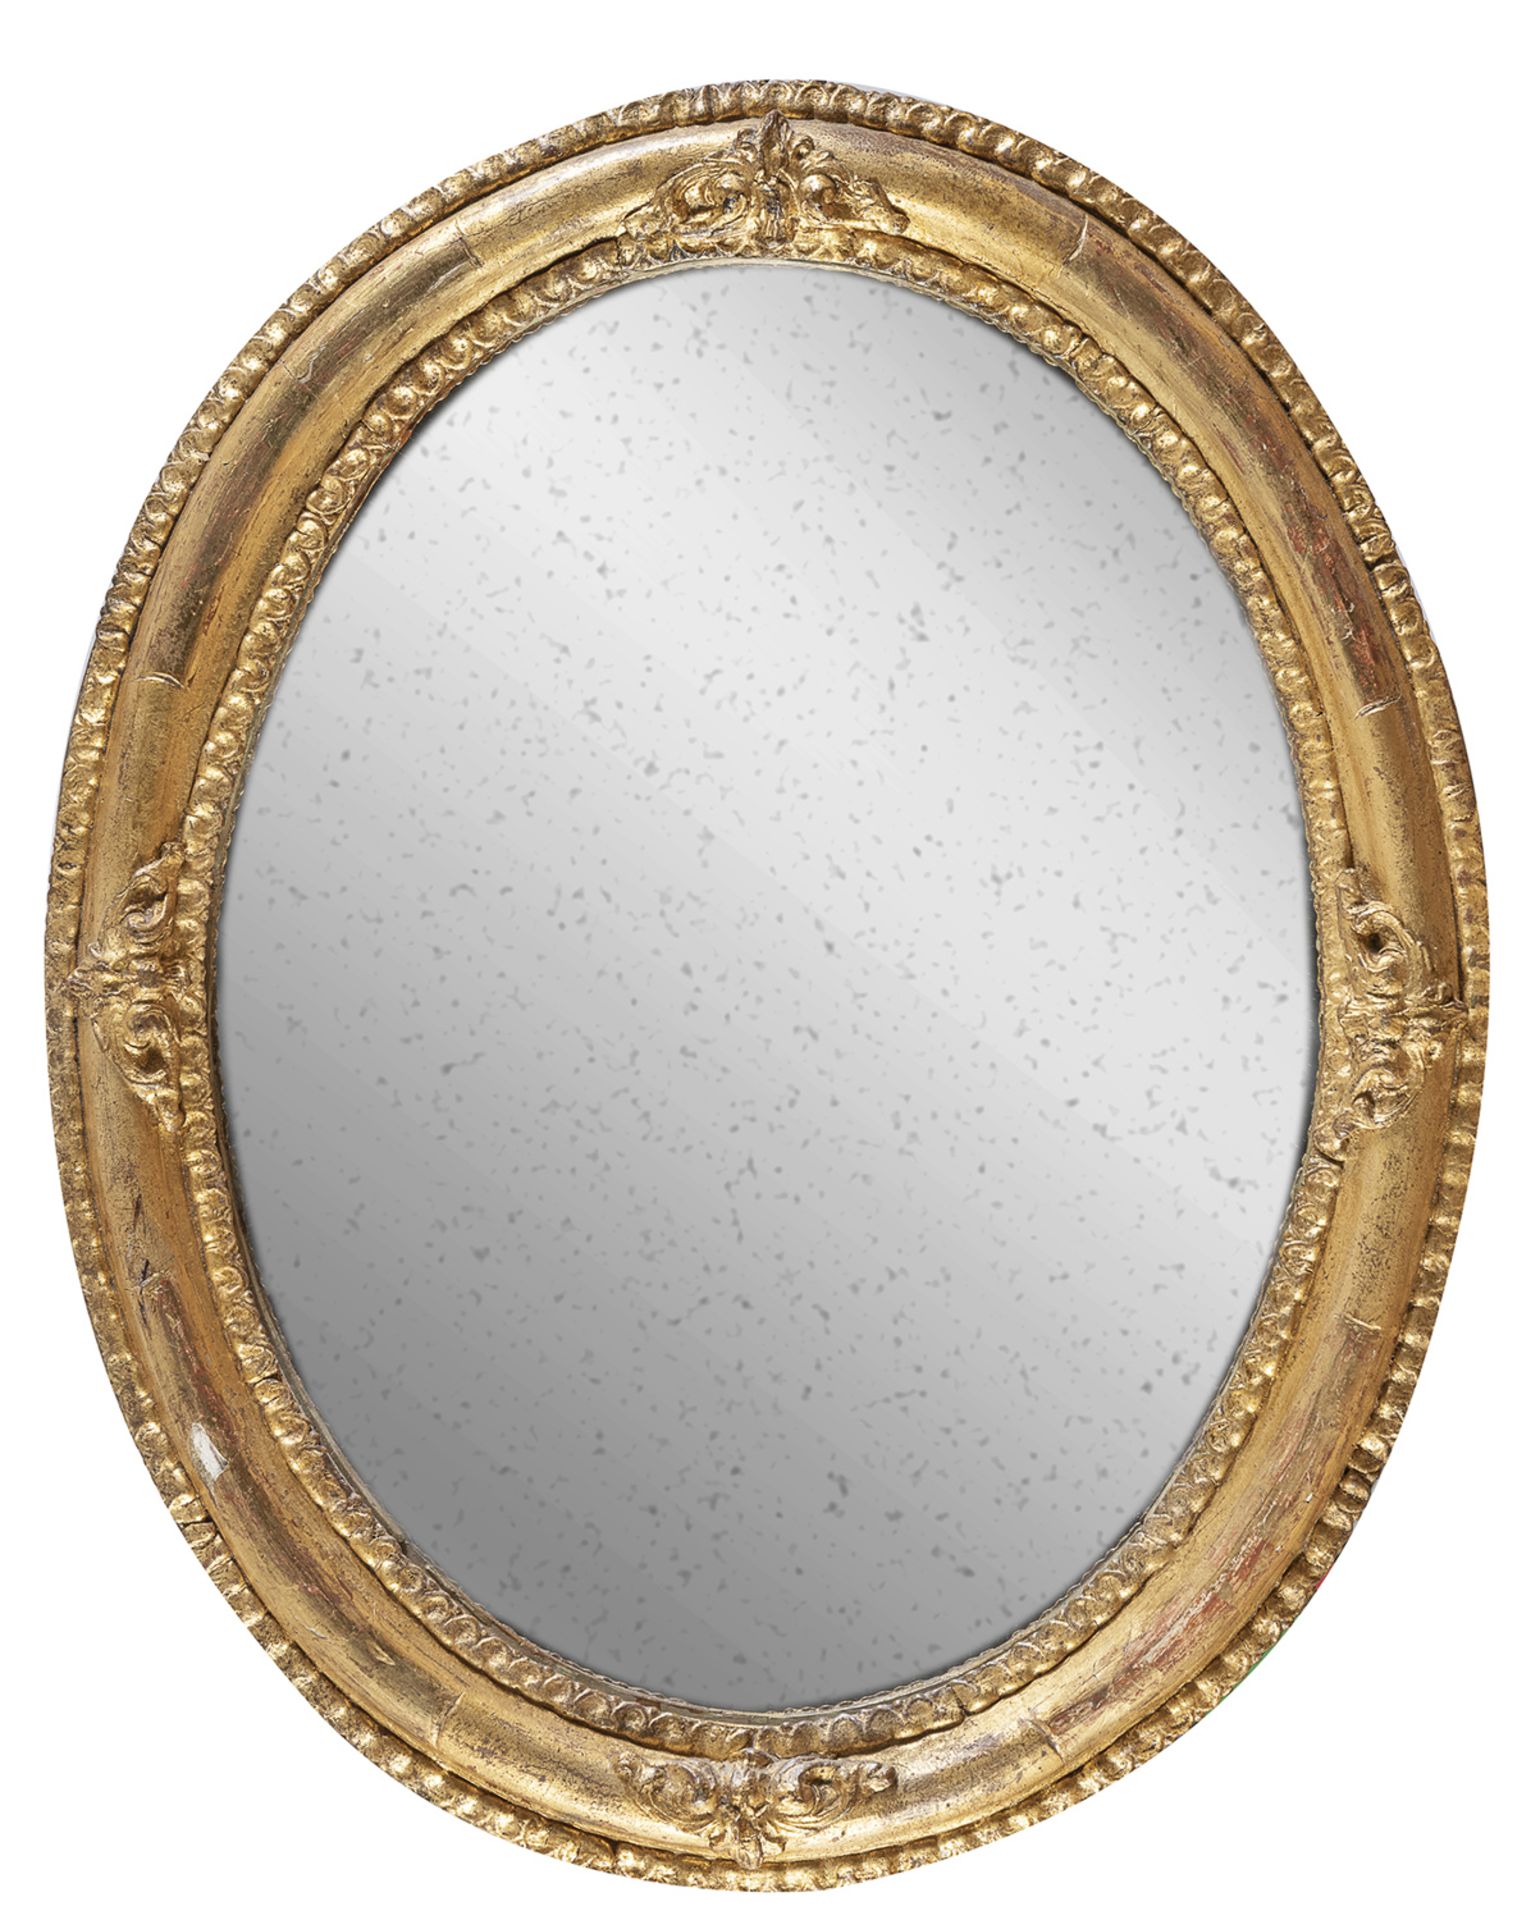 SMALL MIRROR IN GILTWOOD AND PLASTER EARLY 20TH CENTURY